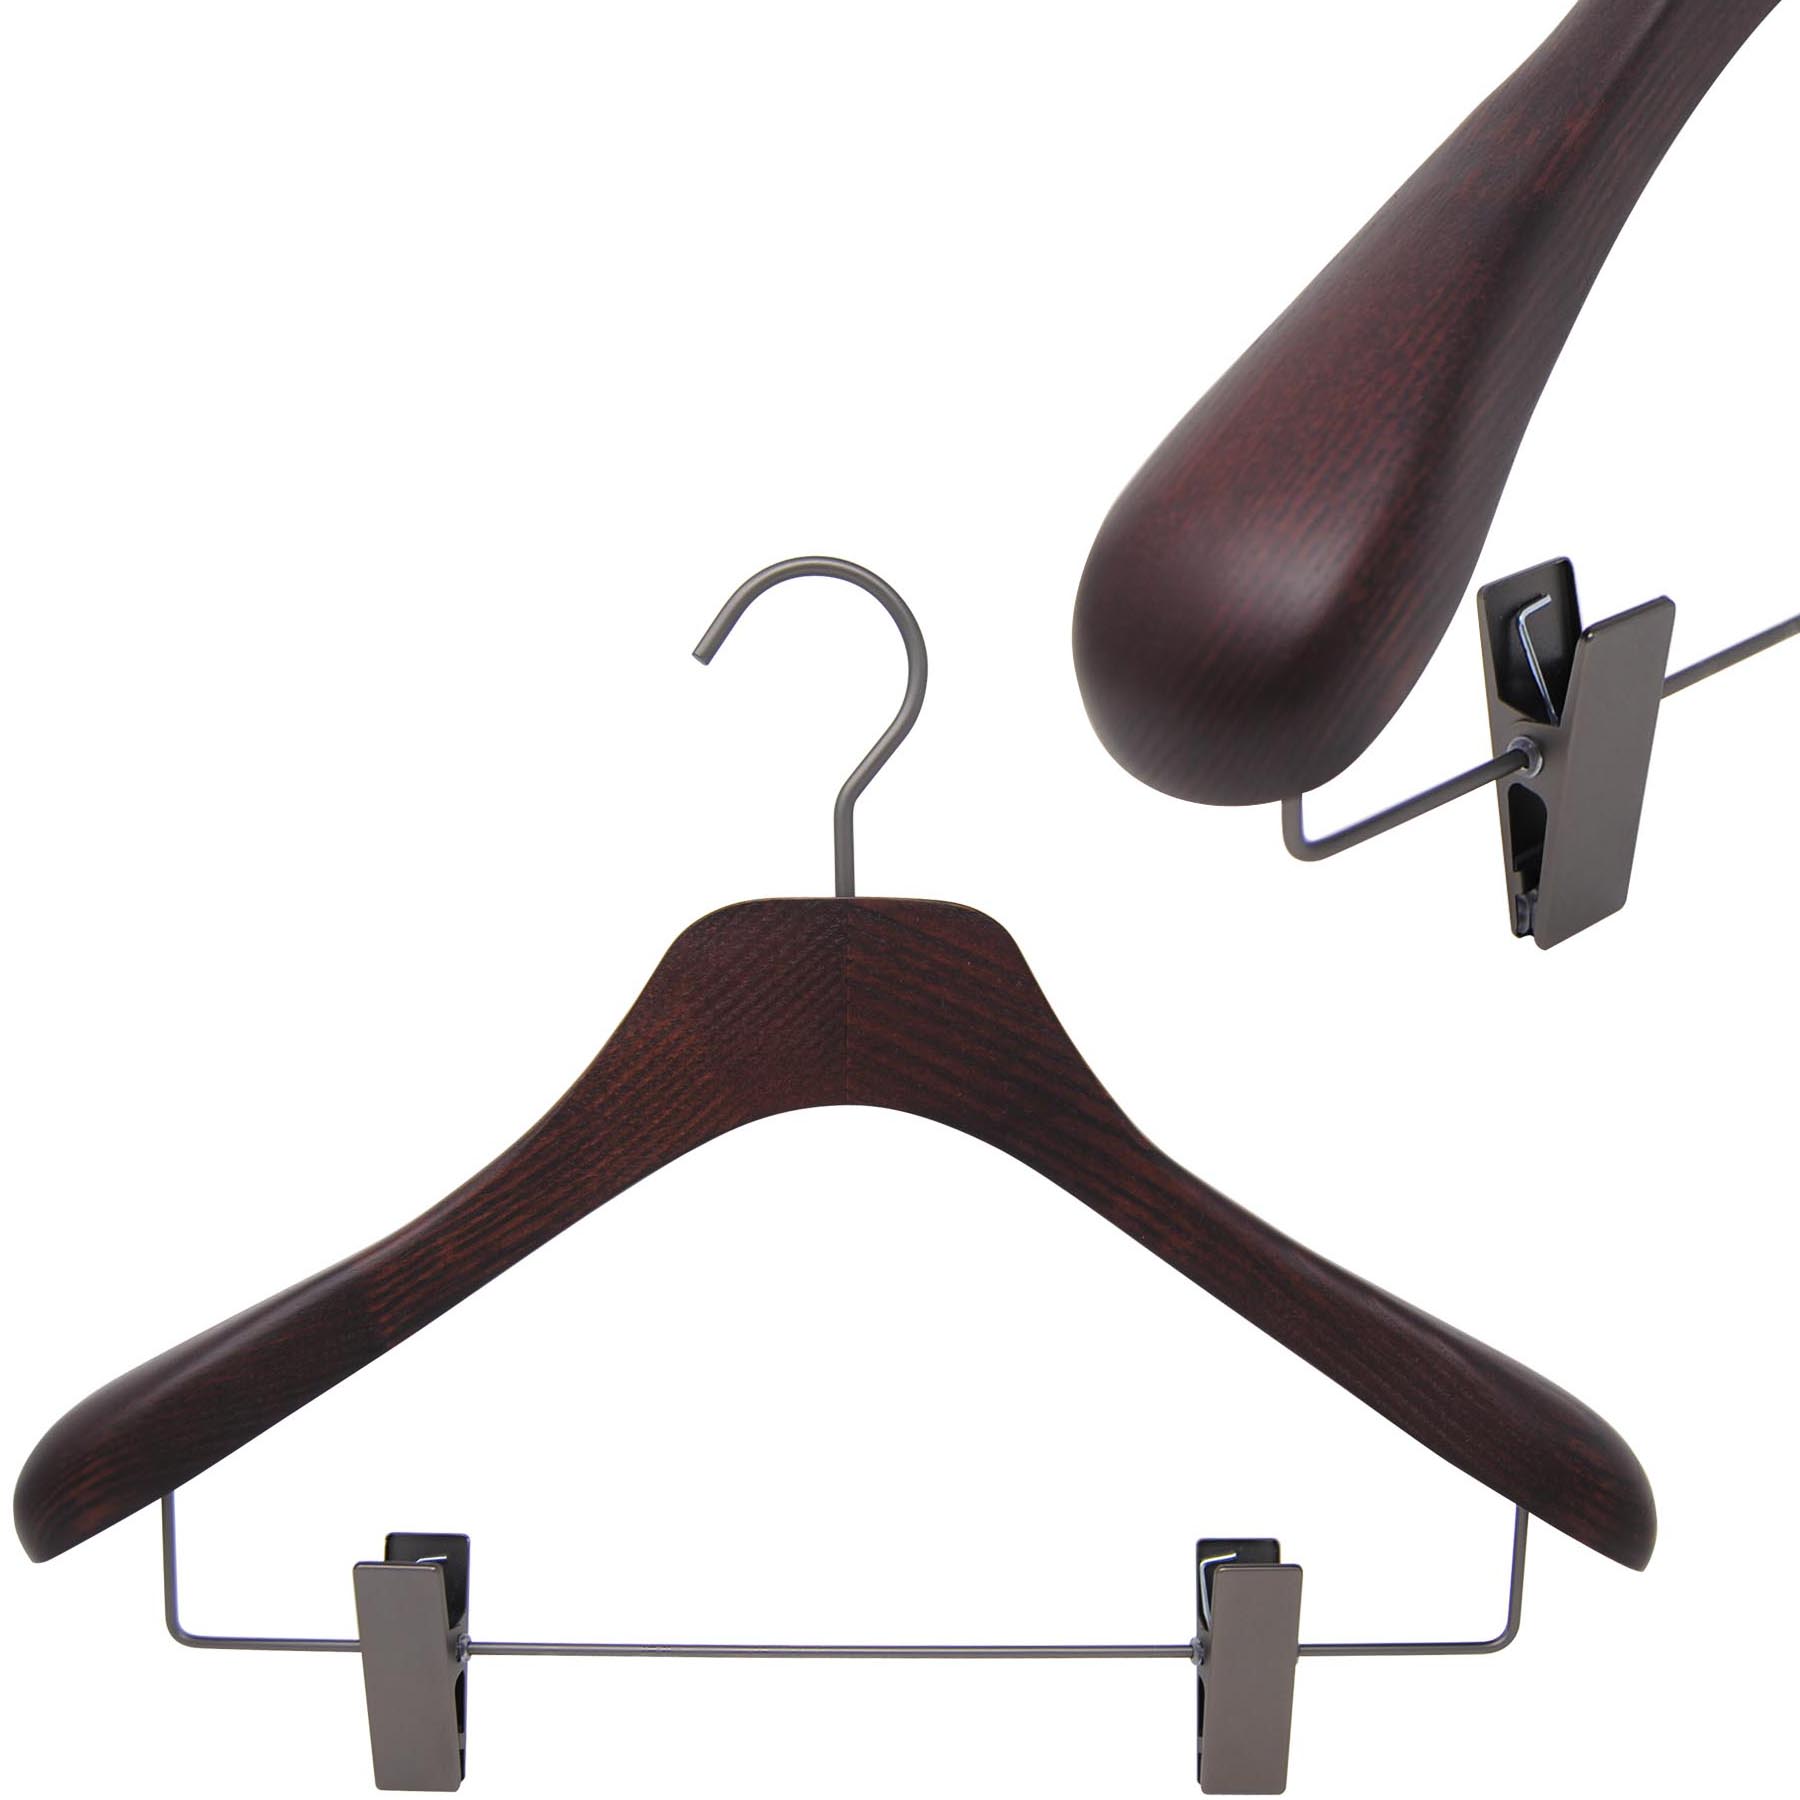 Set of hangers for all women's clothing. Modern and luxury wooden hangers